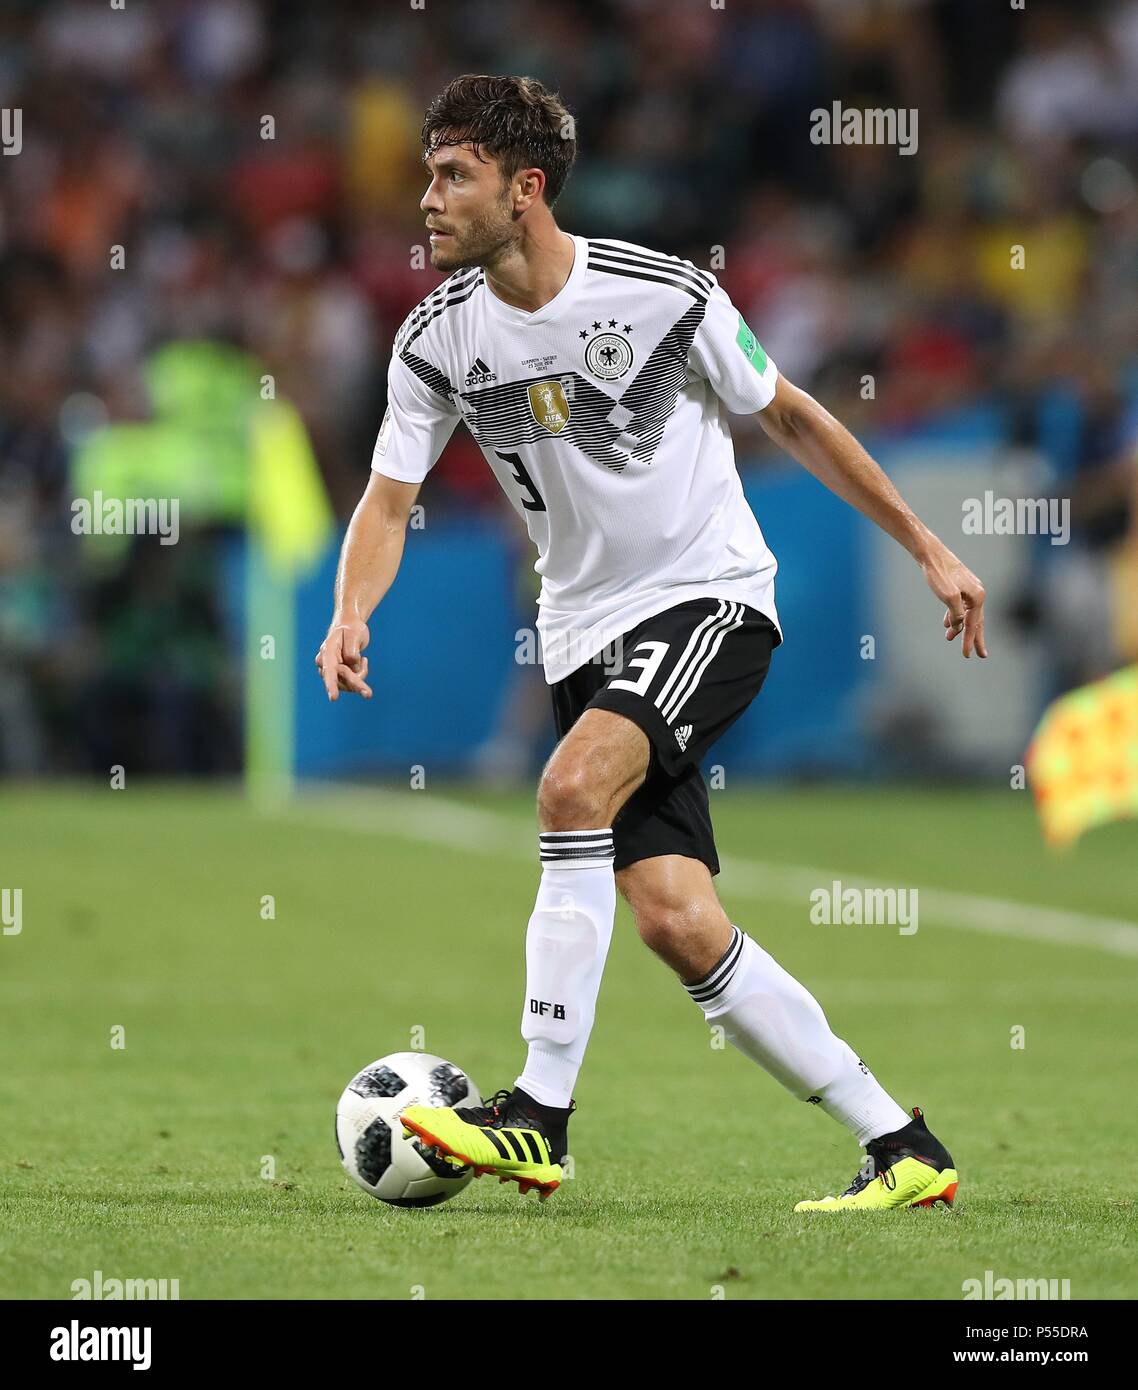 firo: 23.06.2018, Moscow, Fuvuball, Soccer, National Team, World Cup 2018 in Russia, Ruvuland, WC 2018 in Russia, Ruvuland, World Cup 2018 Russia, Russia, M27, Germany - Sweden 2: 1 GER Jonas Hector, single action | usage worldwide Stock Photo